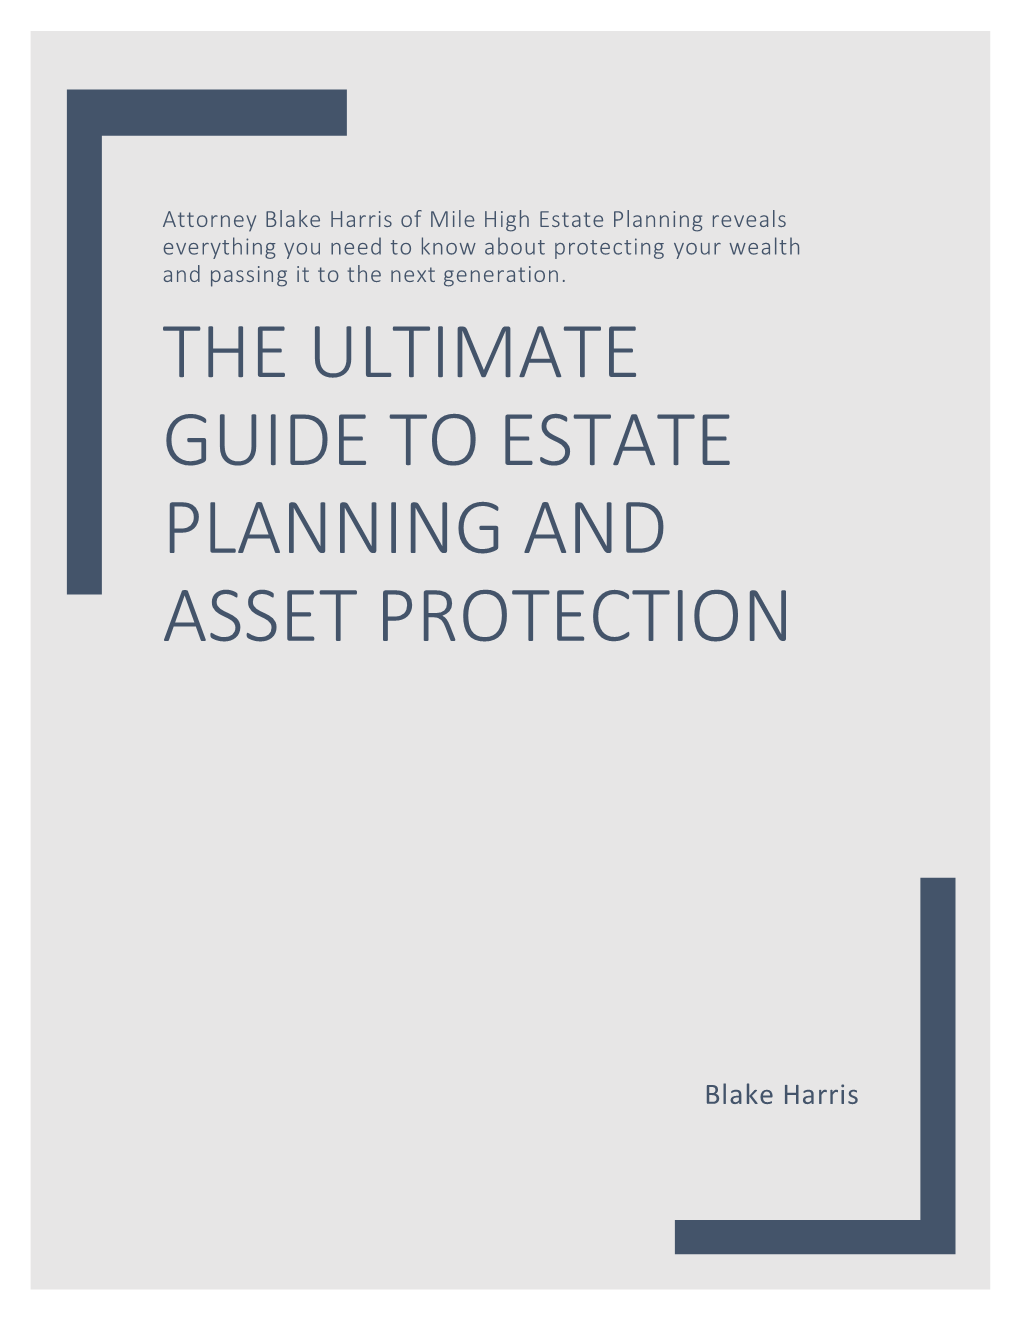 The Ultimate Guide to Estate Planning and Asset Protection